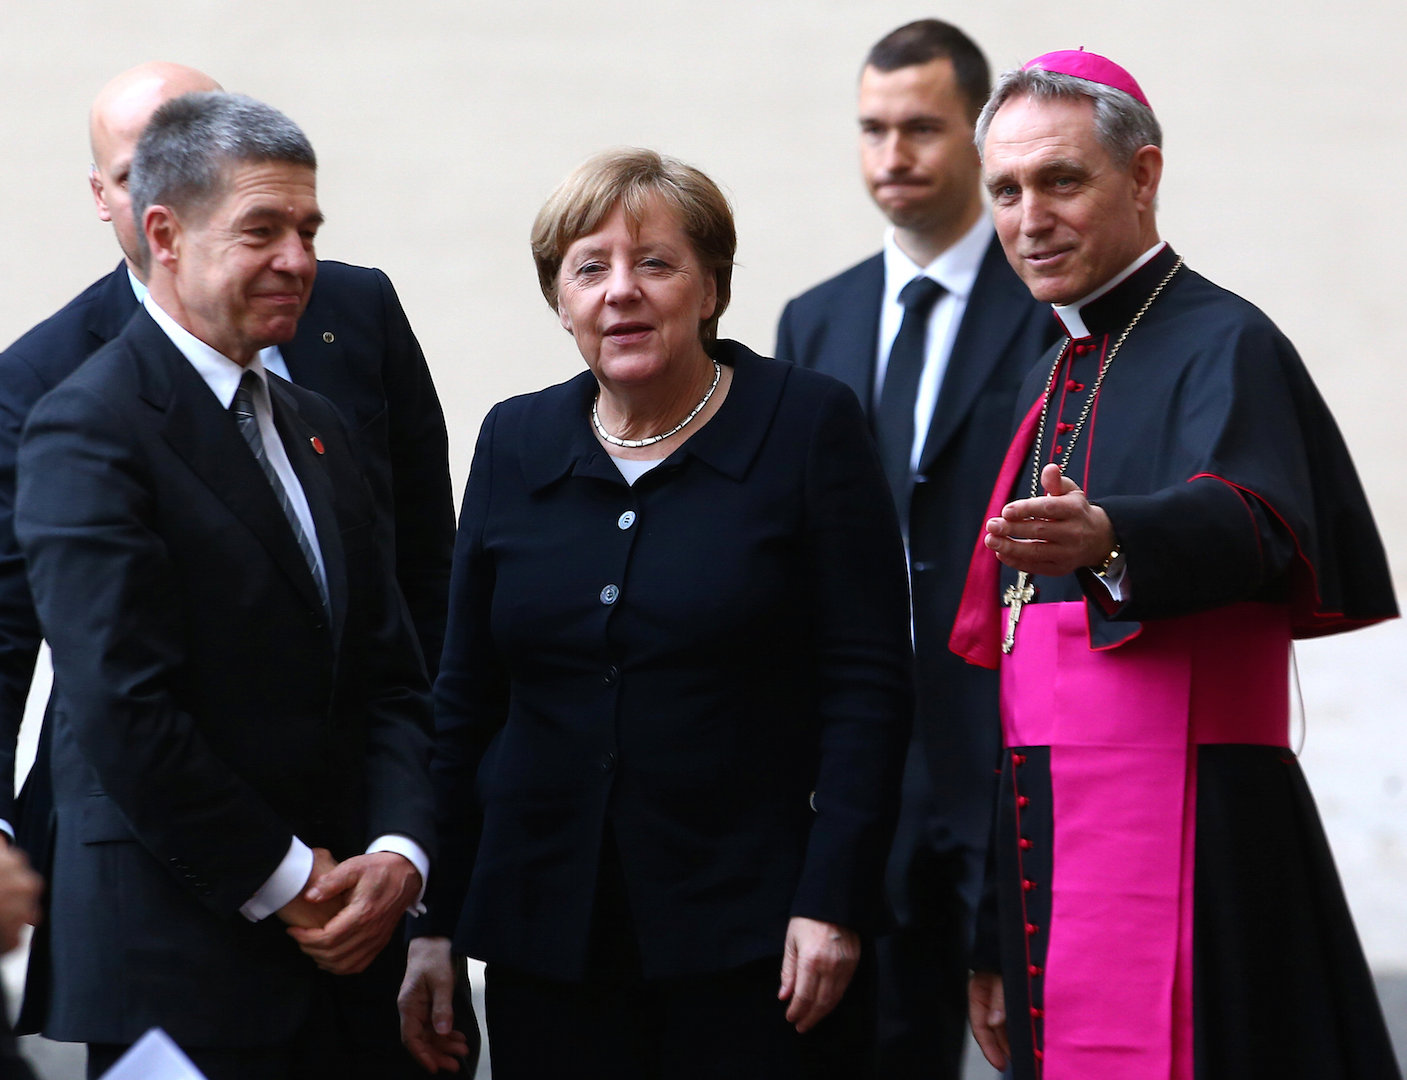 Archbishop Georg Ganswein greets German Chancellor Angela Merkel and her husband, Joachim Sauer, as they arrive March 24 for the European Union summit with Pope Francis at the Vatican (CNS photo/Alessandro Bianchi, Reuters). 